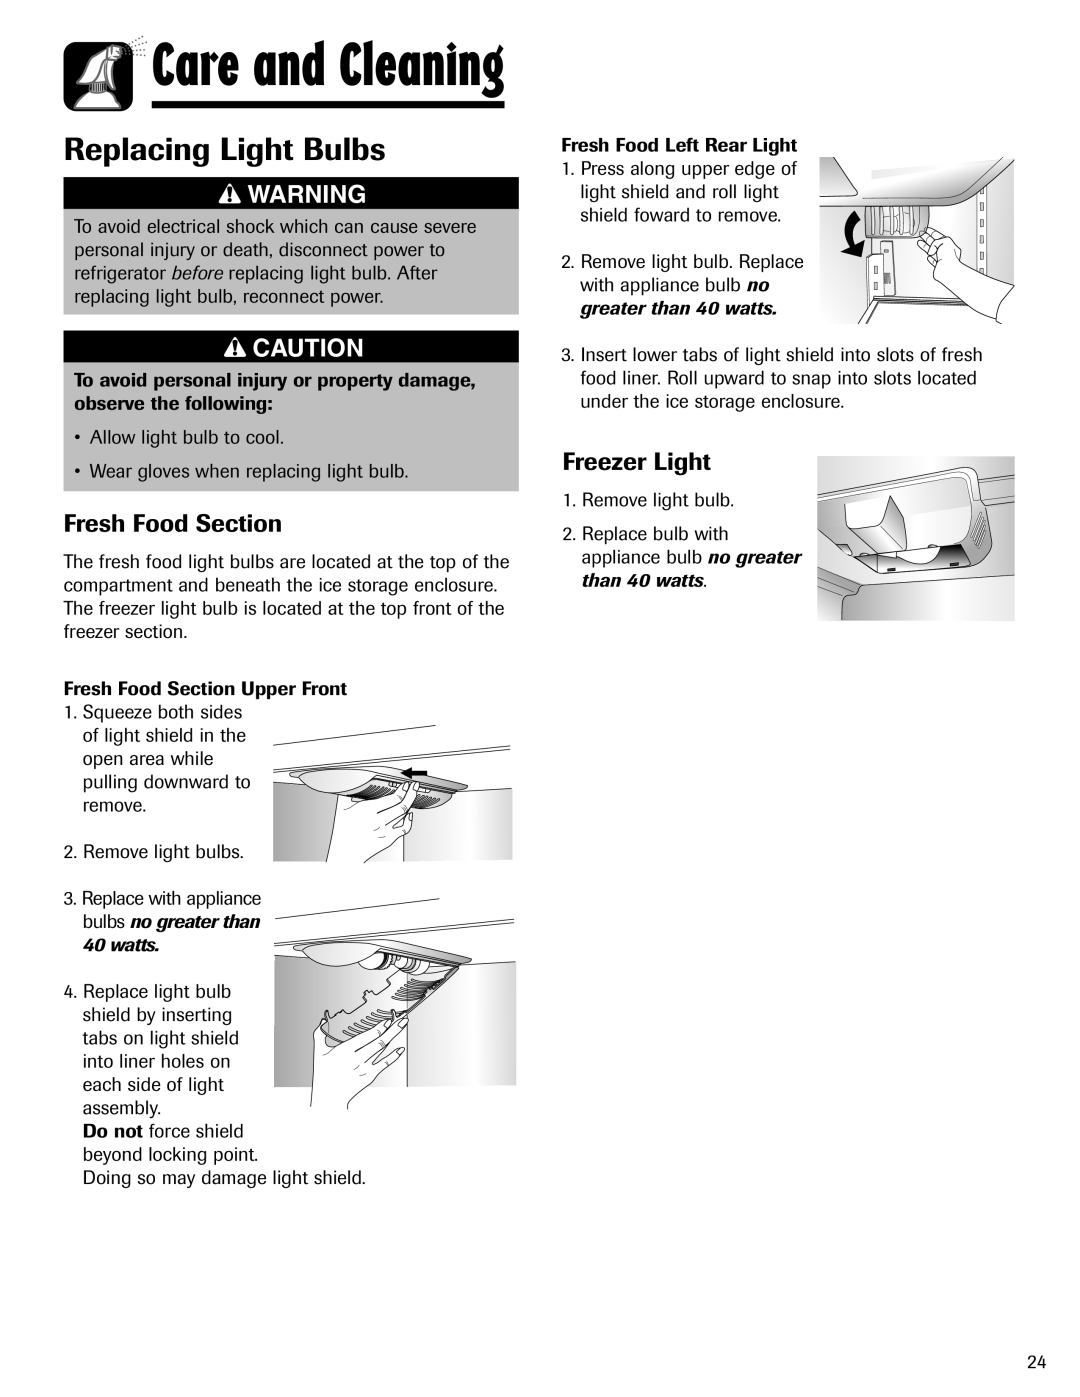 Maytag MFI2266AEW important safety instructions Replacing Light Bulbs, Fresh Food Section, Freezer Light, Care and Cleaning 